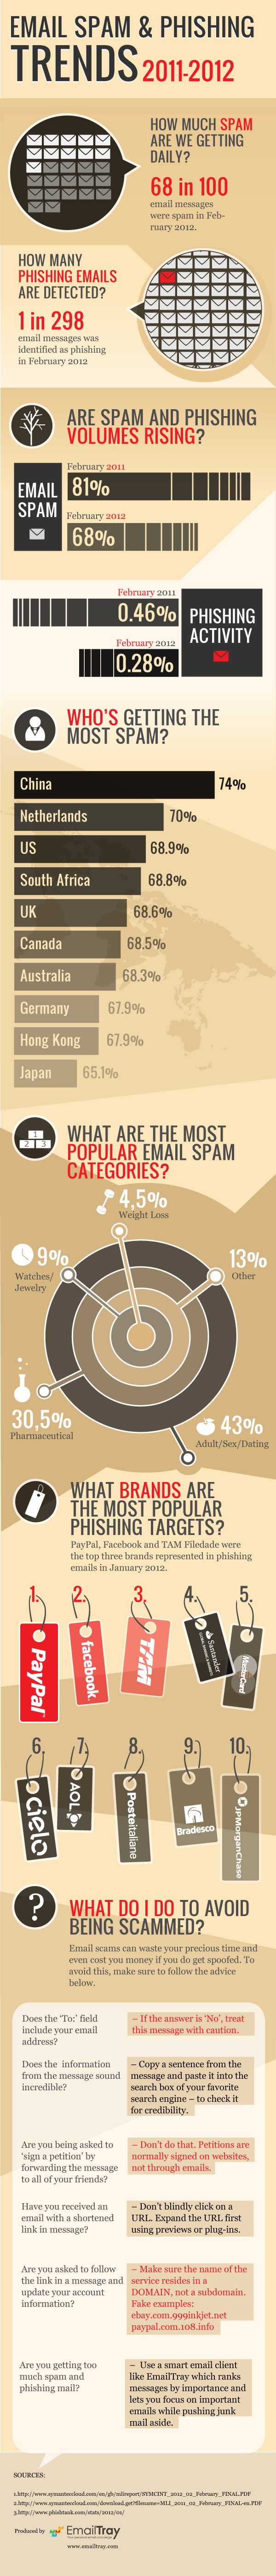 Email spam trends